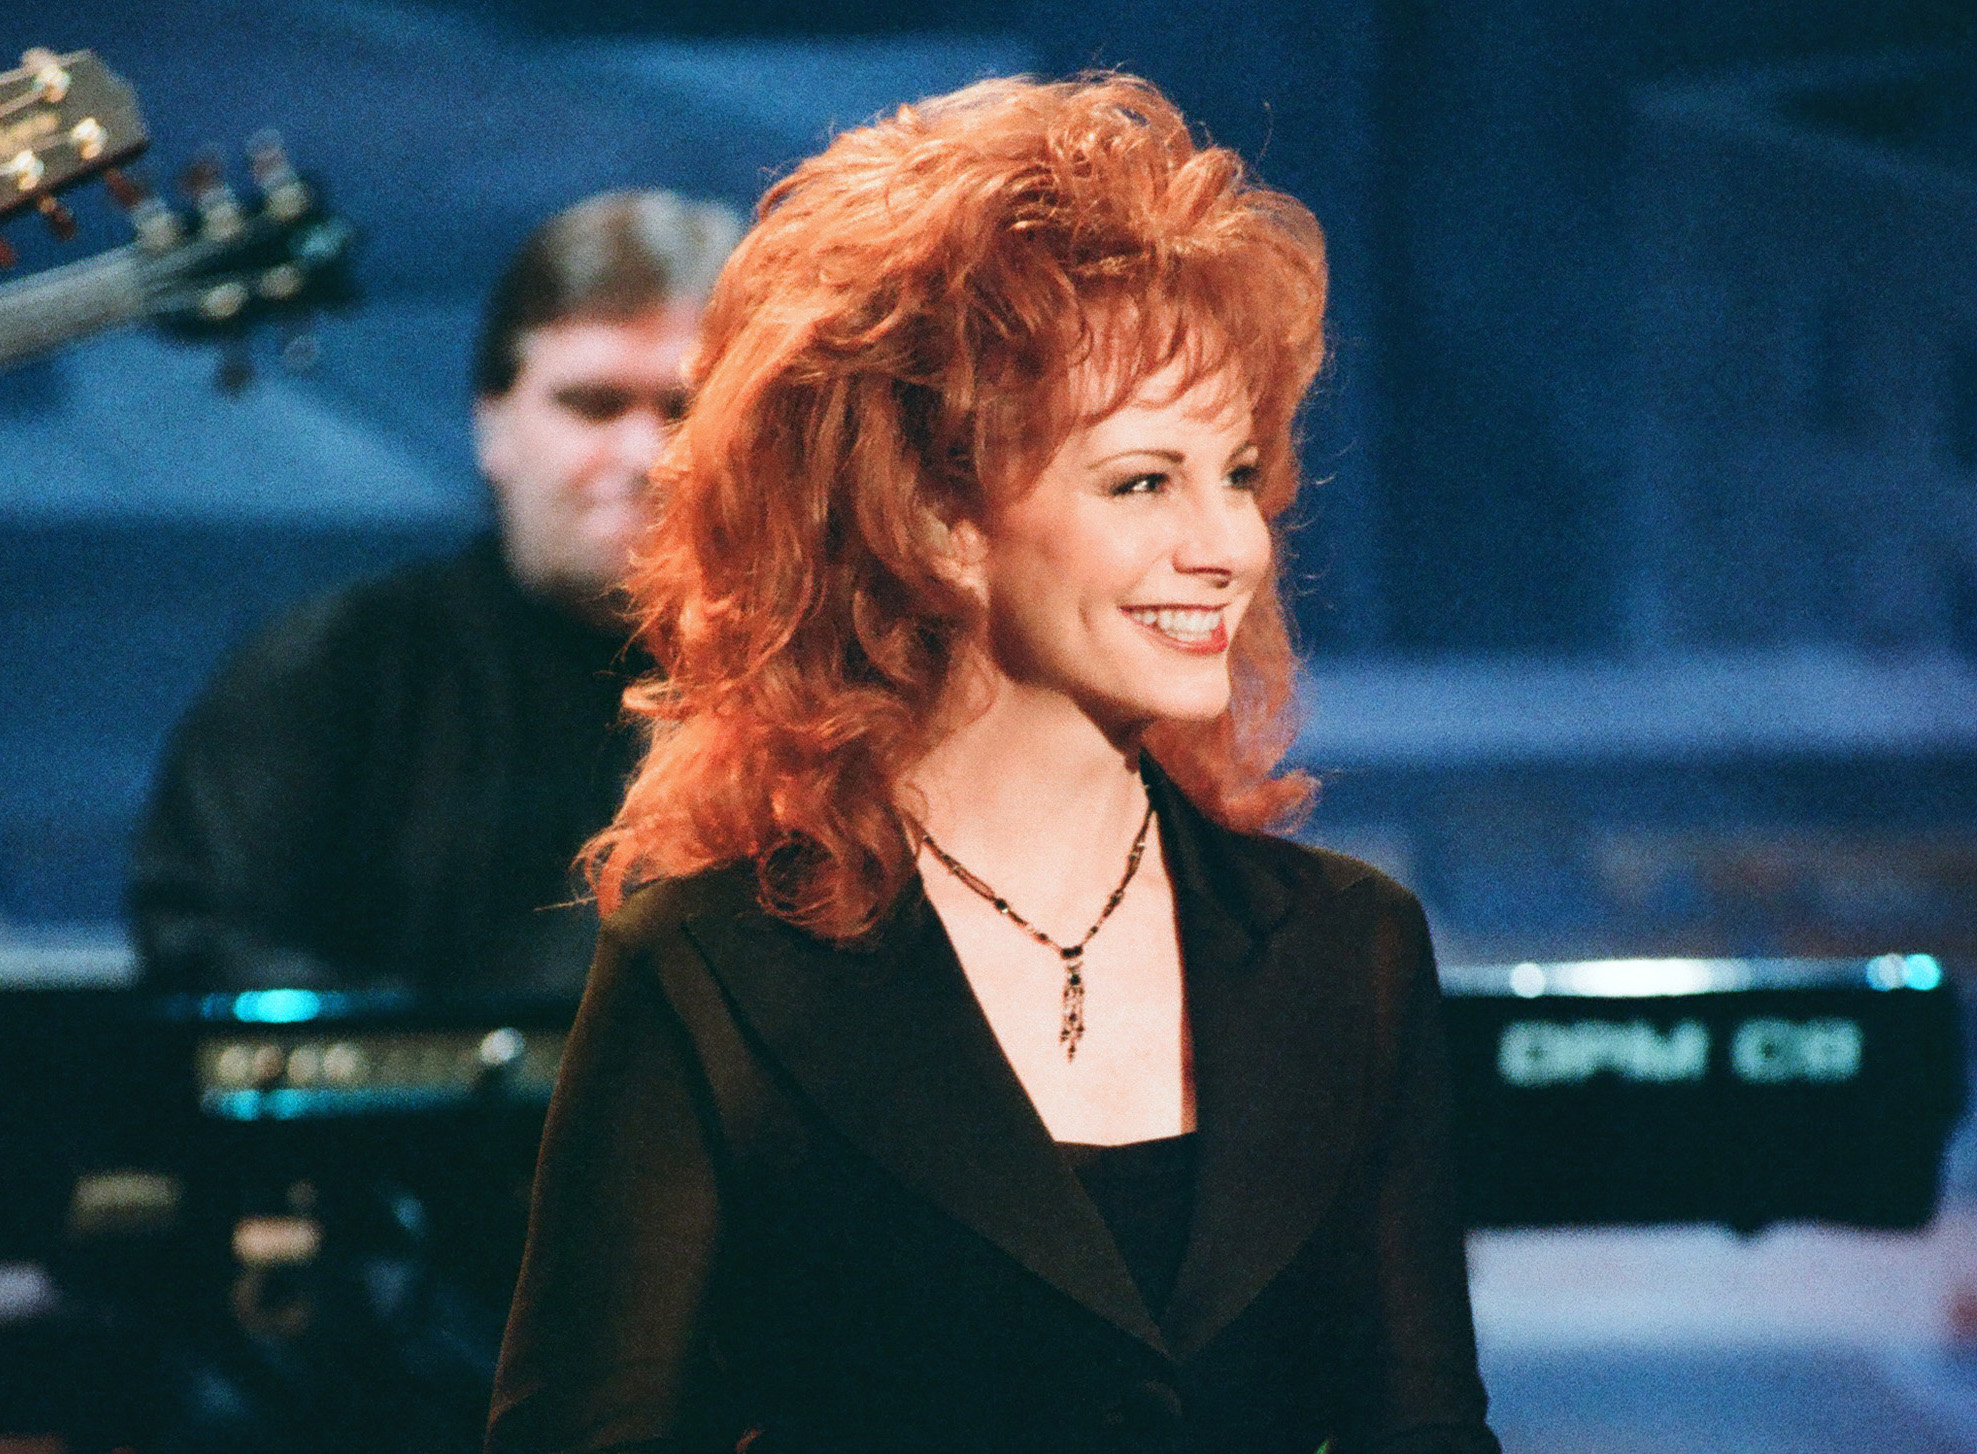 Reba McEntire smiles at an audience, dressed in a black dress and performing on 'The Tonight Show' in 1995